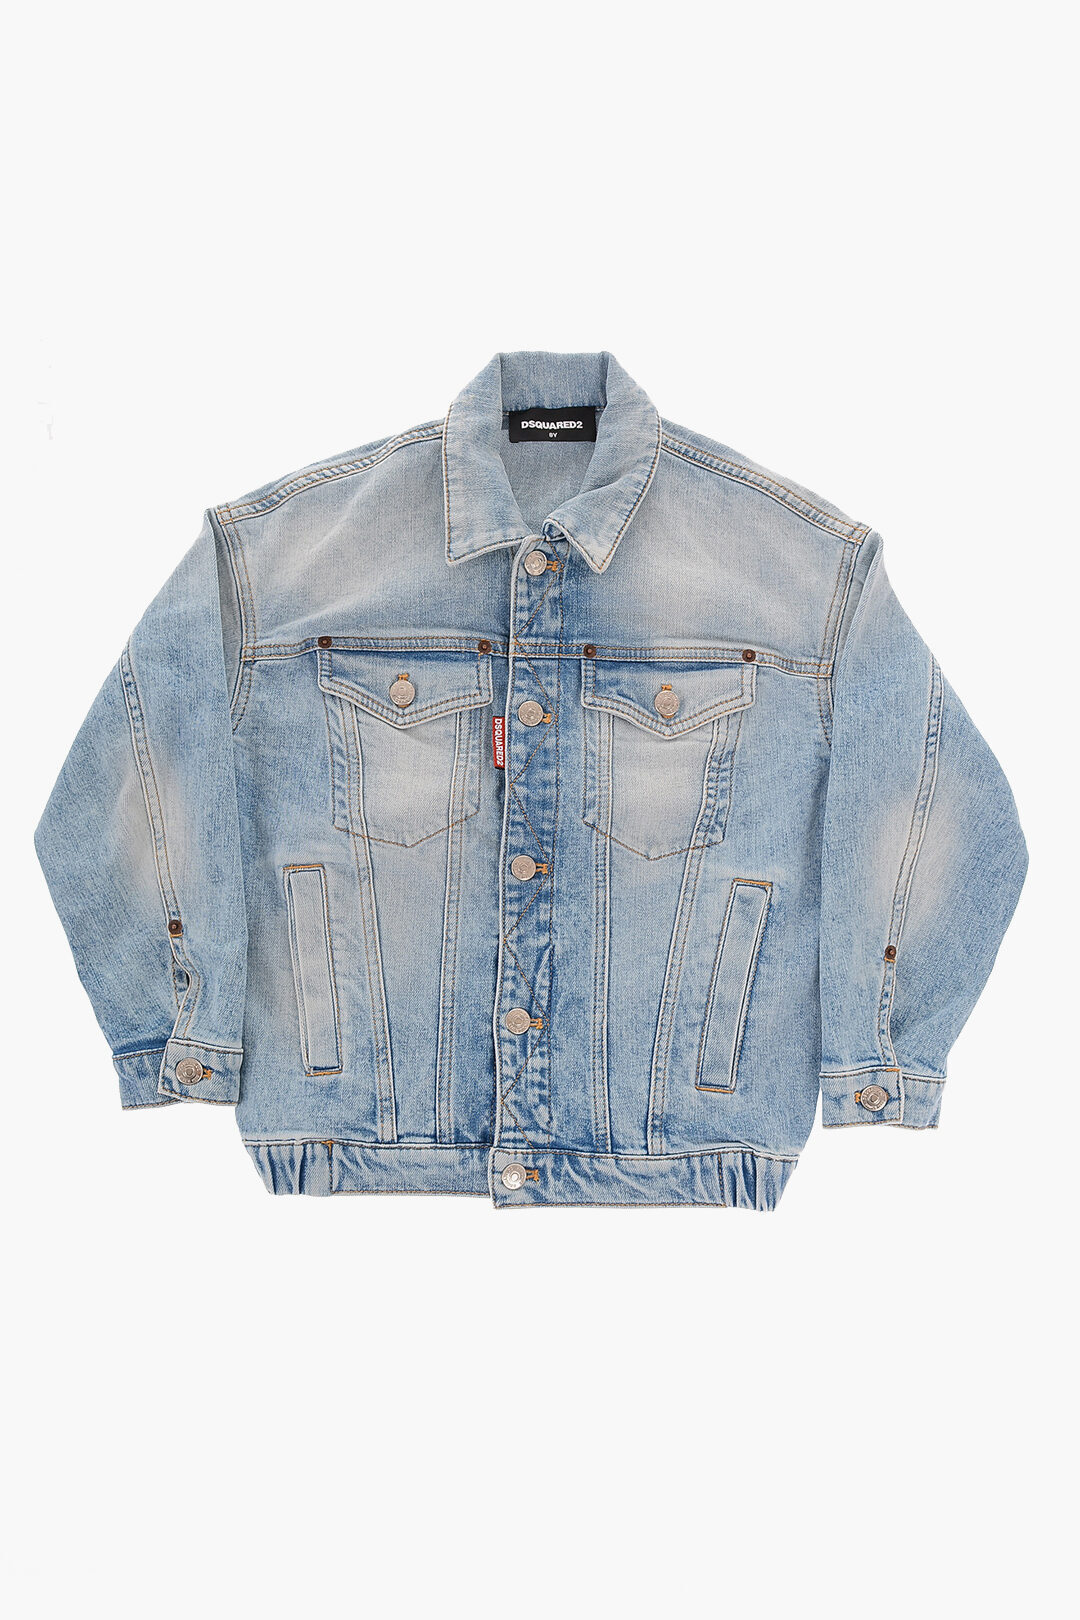 DSQUARED2 ディースクエアード ジャケット DQ0733 D009V DQ01 ガールズ DENIM JACKET WITH SILVER AND ..